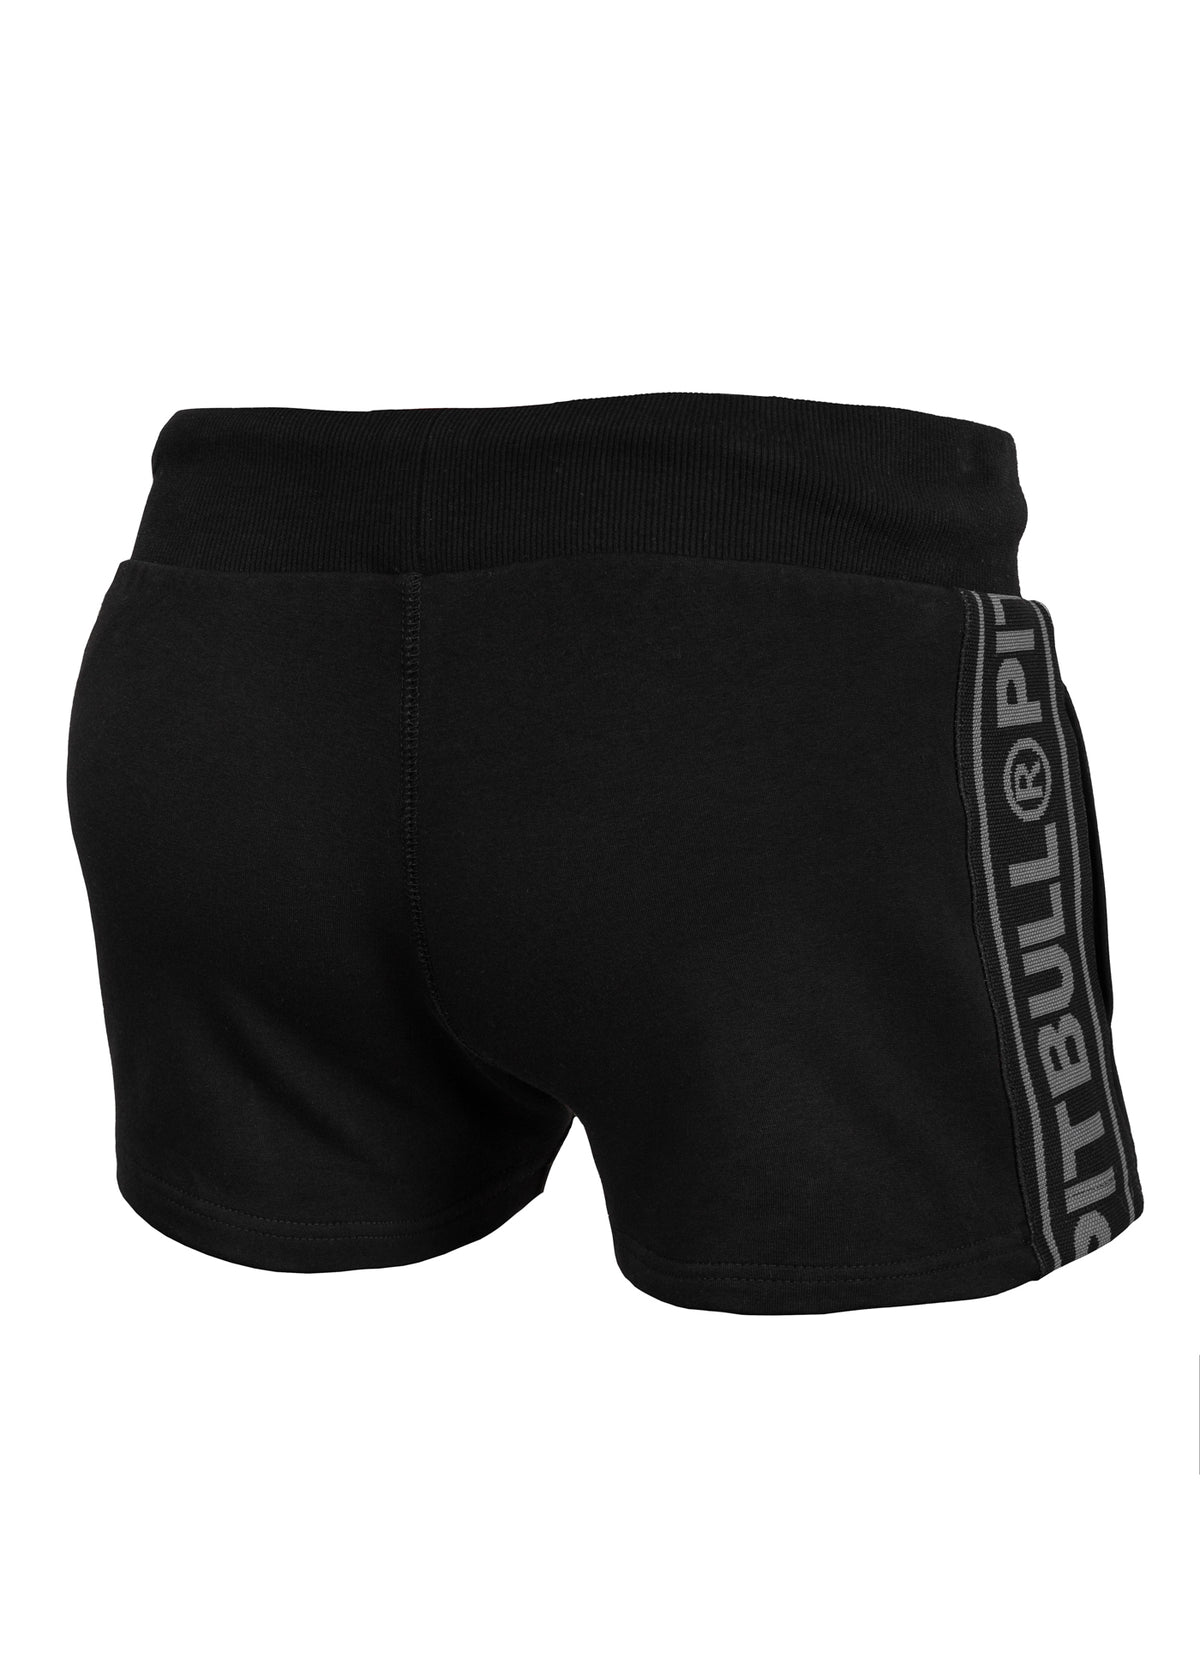 SMALL LOGO FRENCH TERRY 21 Black Shorts.